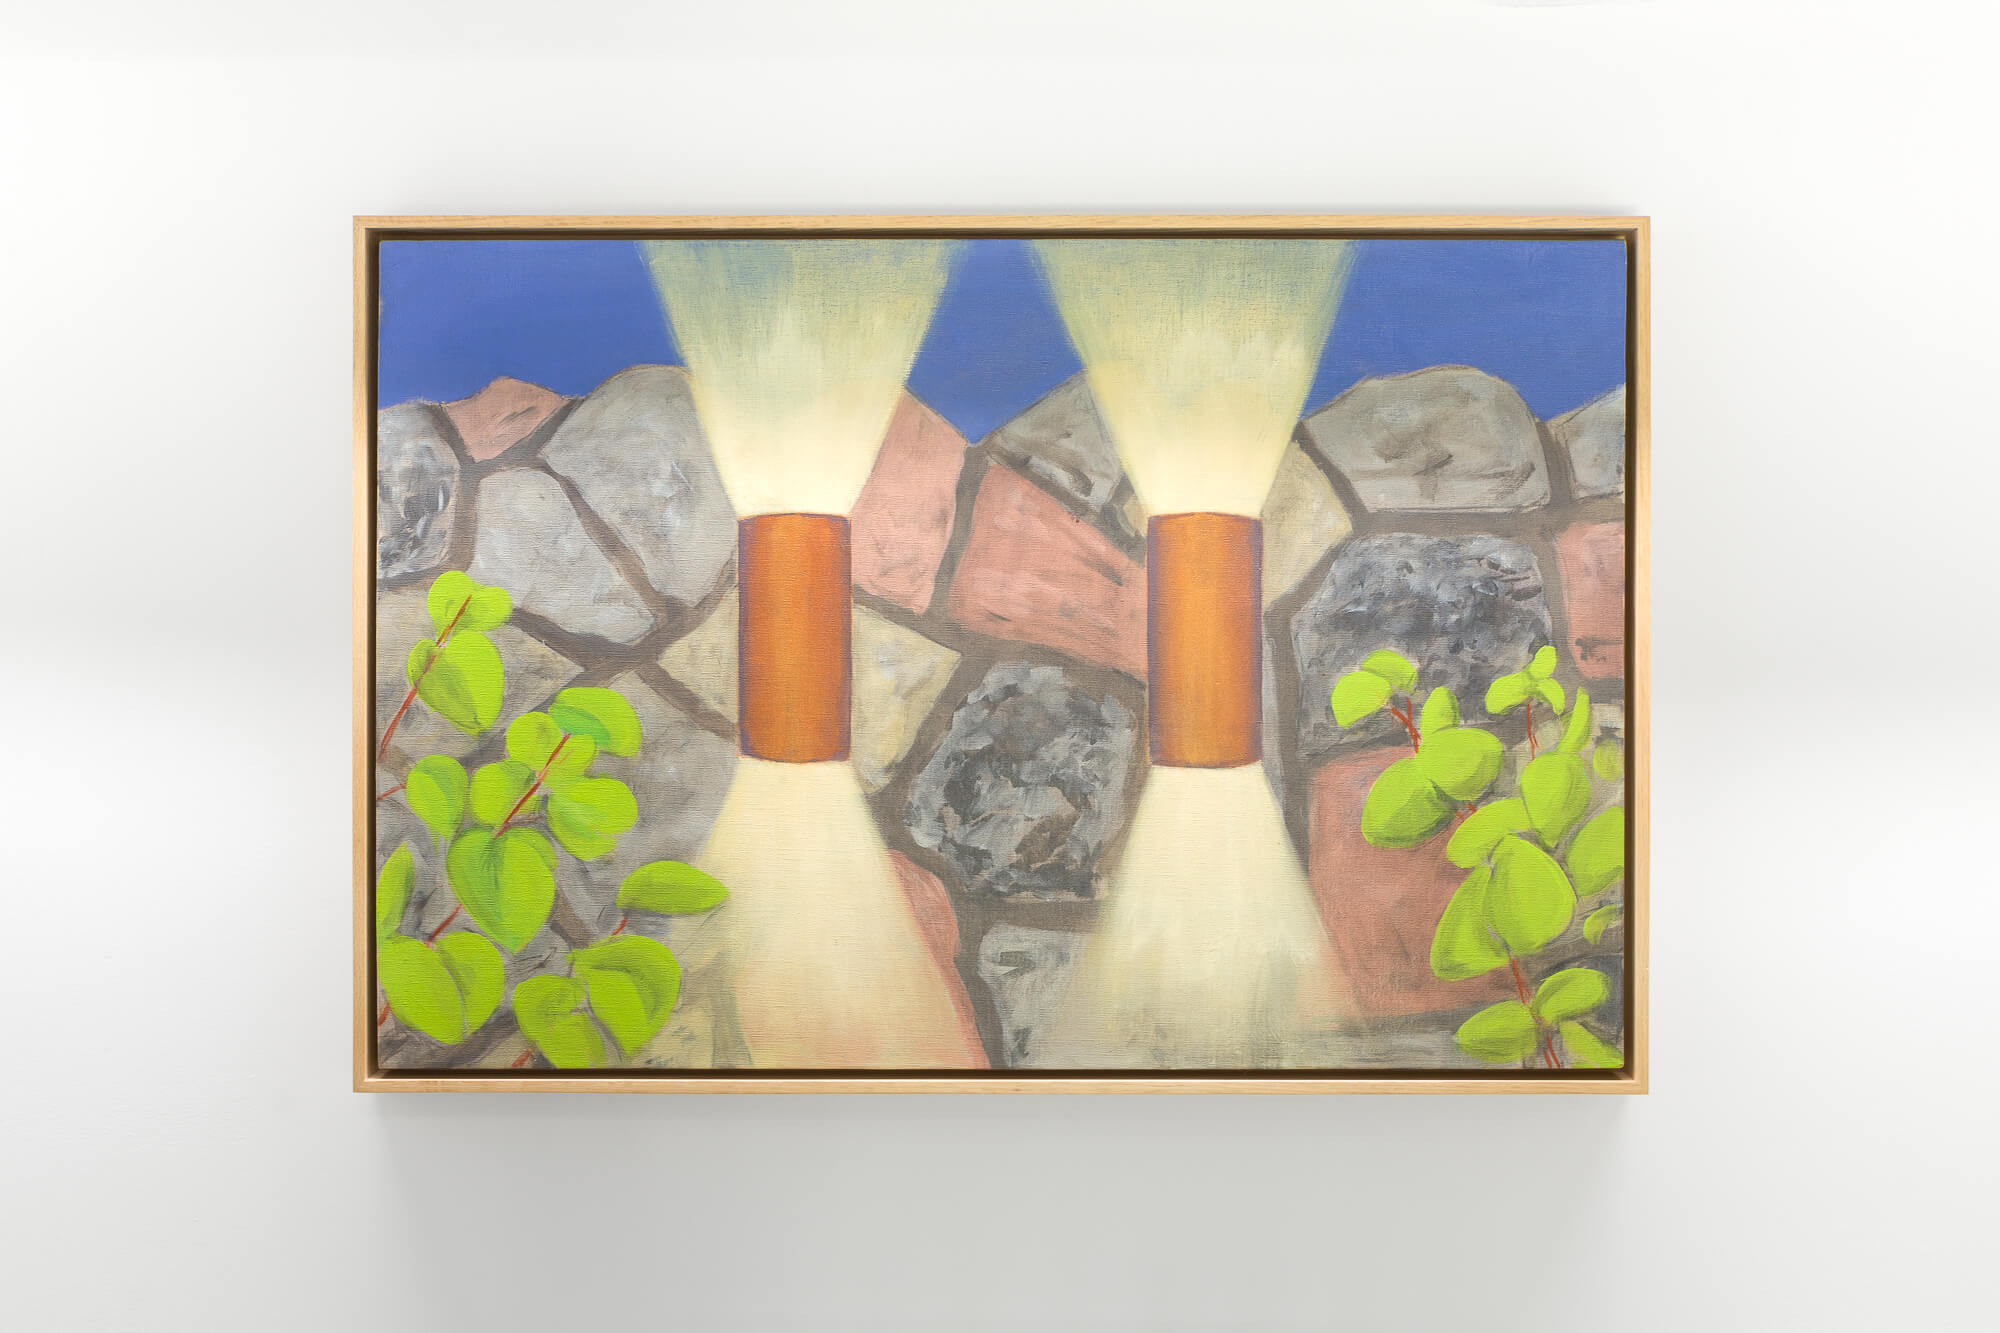 William Leavitt, Twin Wall Lights, 2011. Oil on canvas. Courtesy of the artist and Greene Naftali, New York. Swiss Institute SI ONSITE